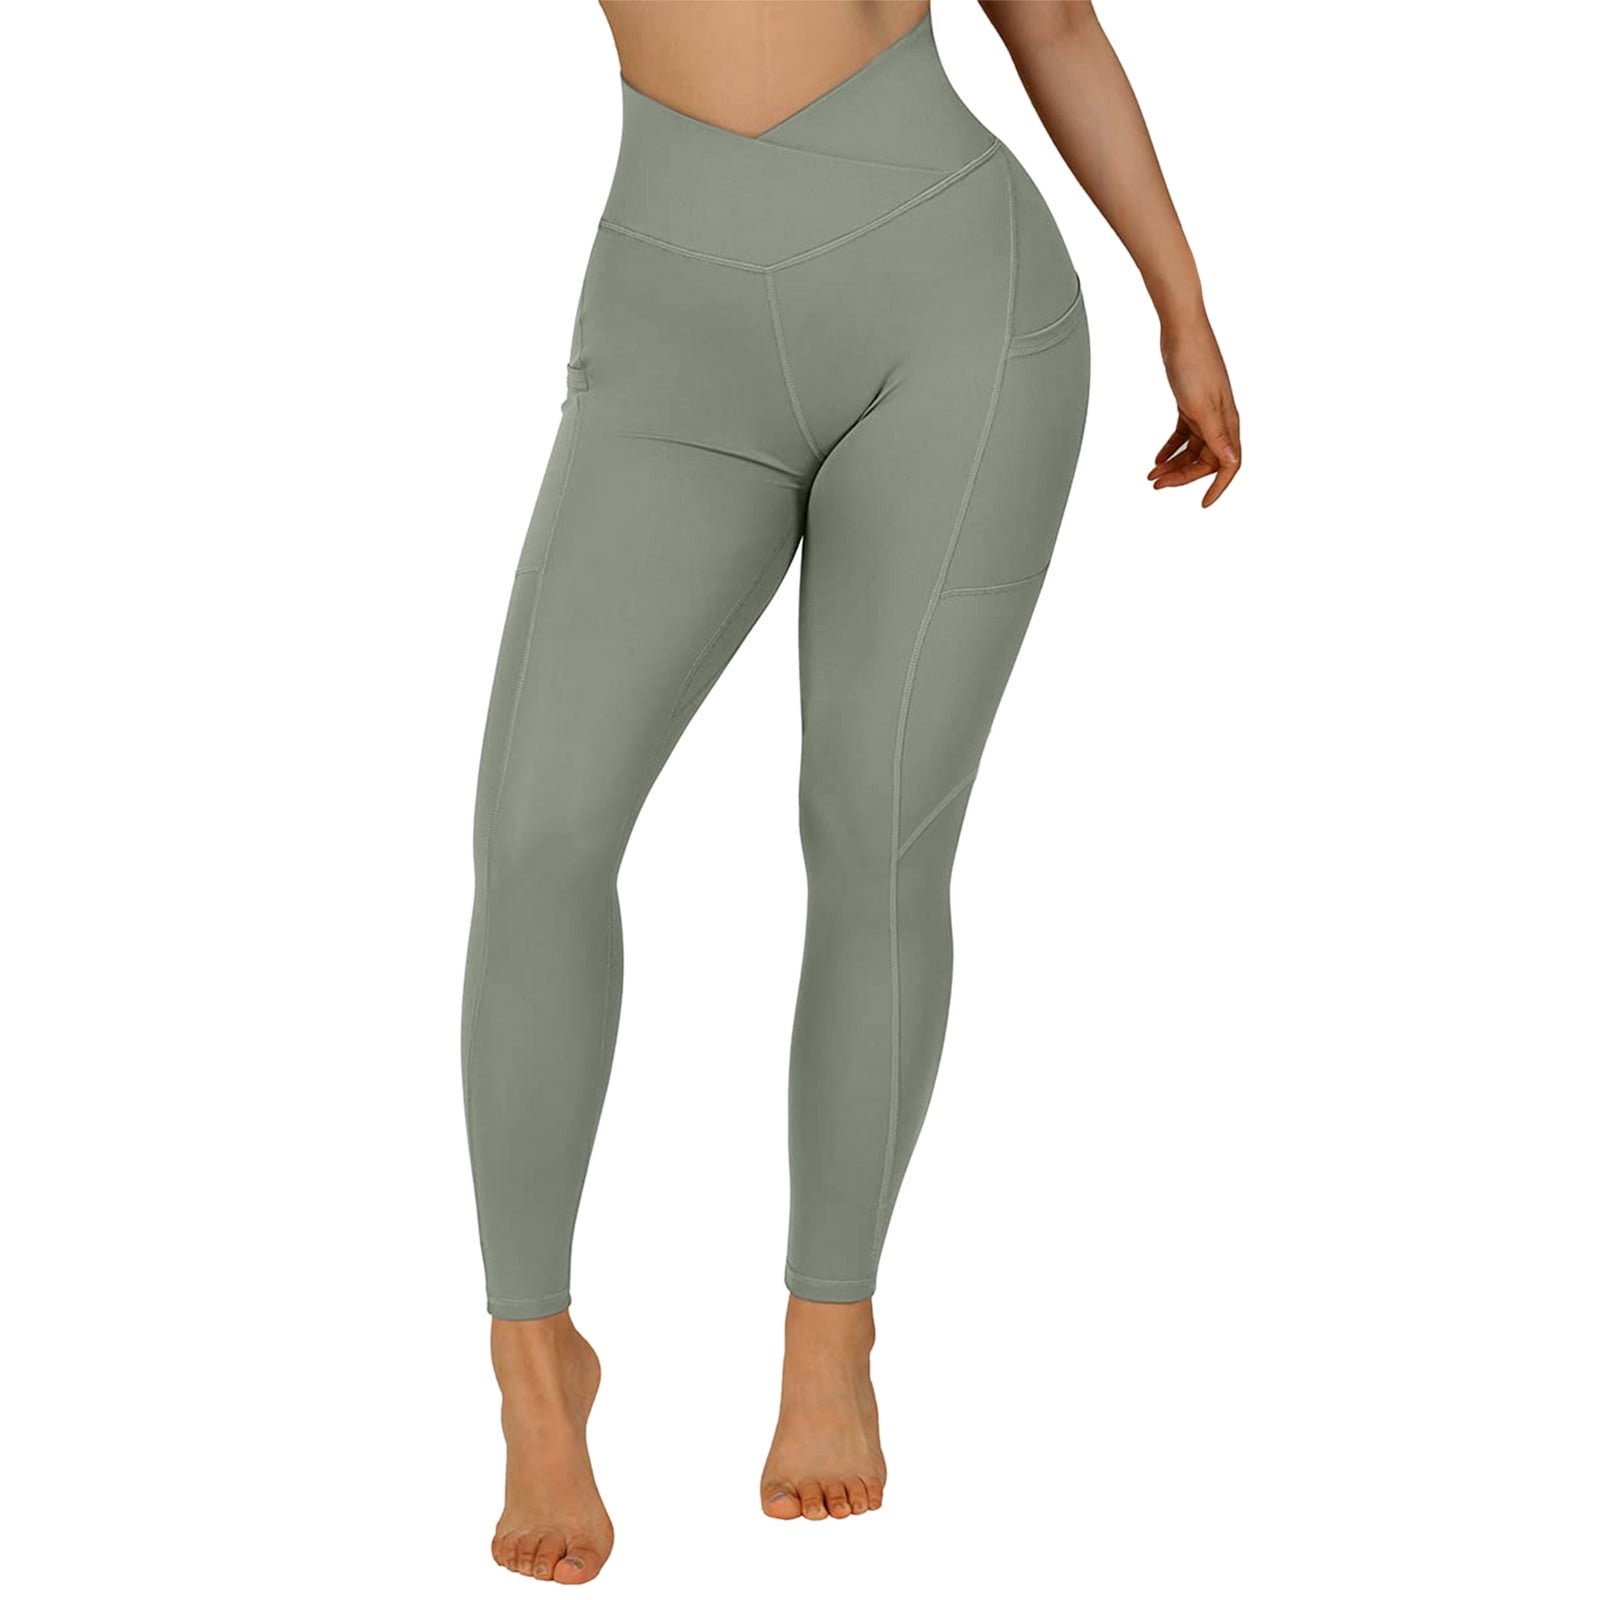  Mguotp Yoga Pants with Pockets for Women Tall Girls' Elasticity Leggings  Trousers Yoga Print Trouser High Casual Sports Waist Green : Clothing,  Shoes & Jewelry